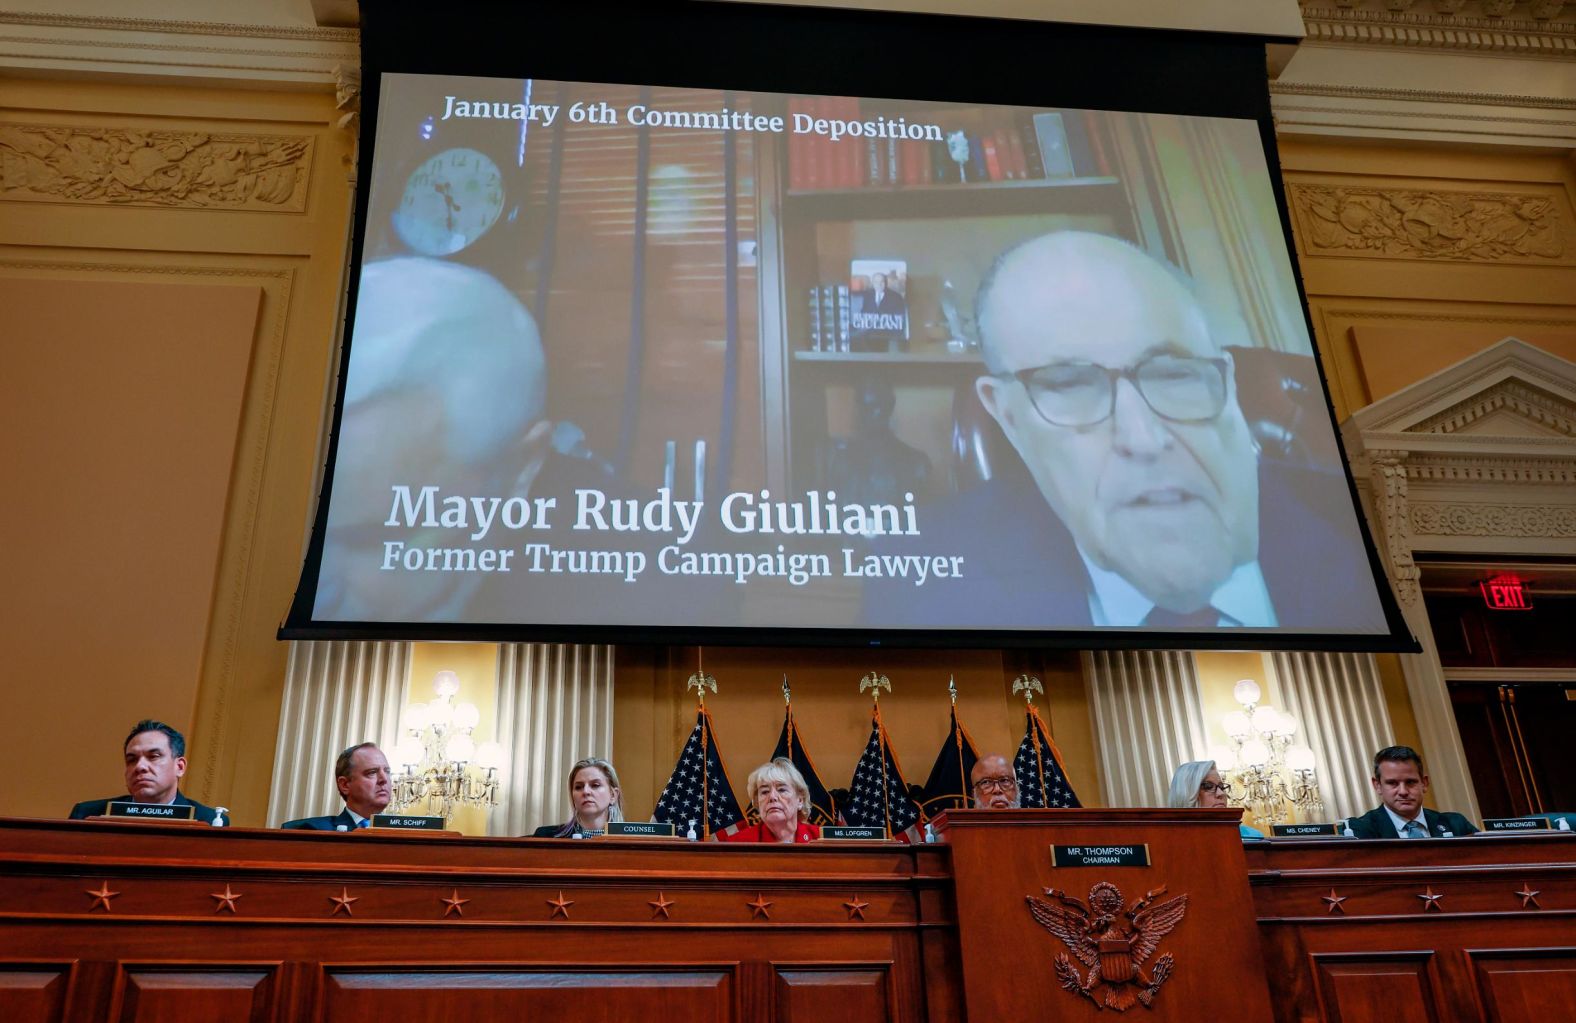 Recorded testimony from former Trump adviser Rudy Giuliani is played during the June 13 hearing. The committee said it had evidence showing how Trump cast aside his legal team after his election loss and replaced them with conspiracy-pushing advisers like Giuliani. "Trump rejected the advice of his campaign experts on election night, and instead followed the course recommended by an apparently inebriated Rudy Giuliani, to just claim that he won," <a href="index.php?page=&url=https%3A%2F%2Fwww.cnn.com%2Fpolitics%2Flive-news%2Fjanuary-6-hearings-june-13%2Fh_46f5ed06ecf282e17c9e79a816f634ae" target="_blank">Cheney said in her opening statement.</a> The panel later played a clip from Trump spokesman Jason Miller, whose said in his deposition that "the mayor was definitely intoxicated" at the White House on election night. Giuliani has denied any wrongdoing related to the efforts to overturn the election.